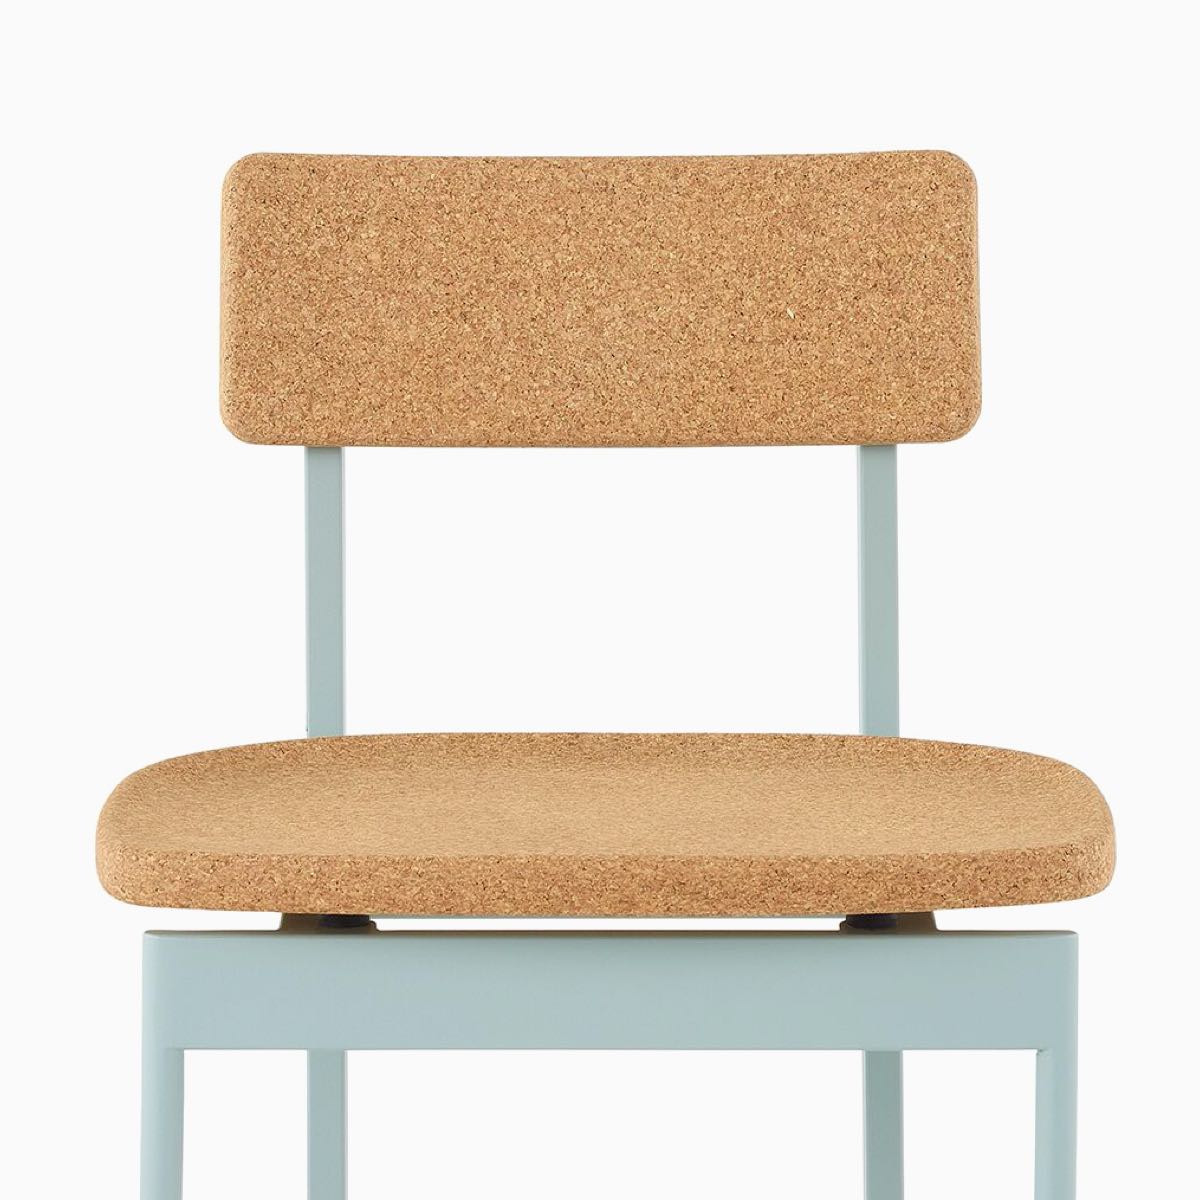 A Betwixt Chair with a cork seat and backrest with a glacier frame.